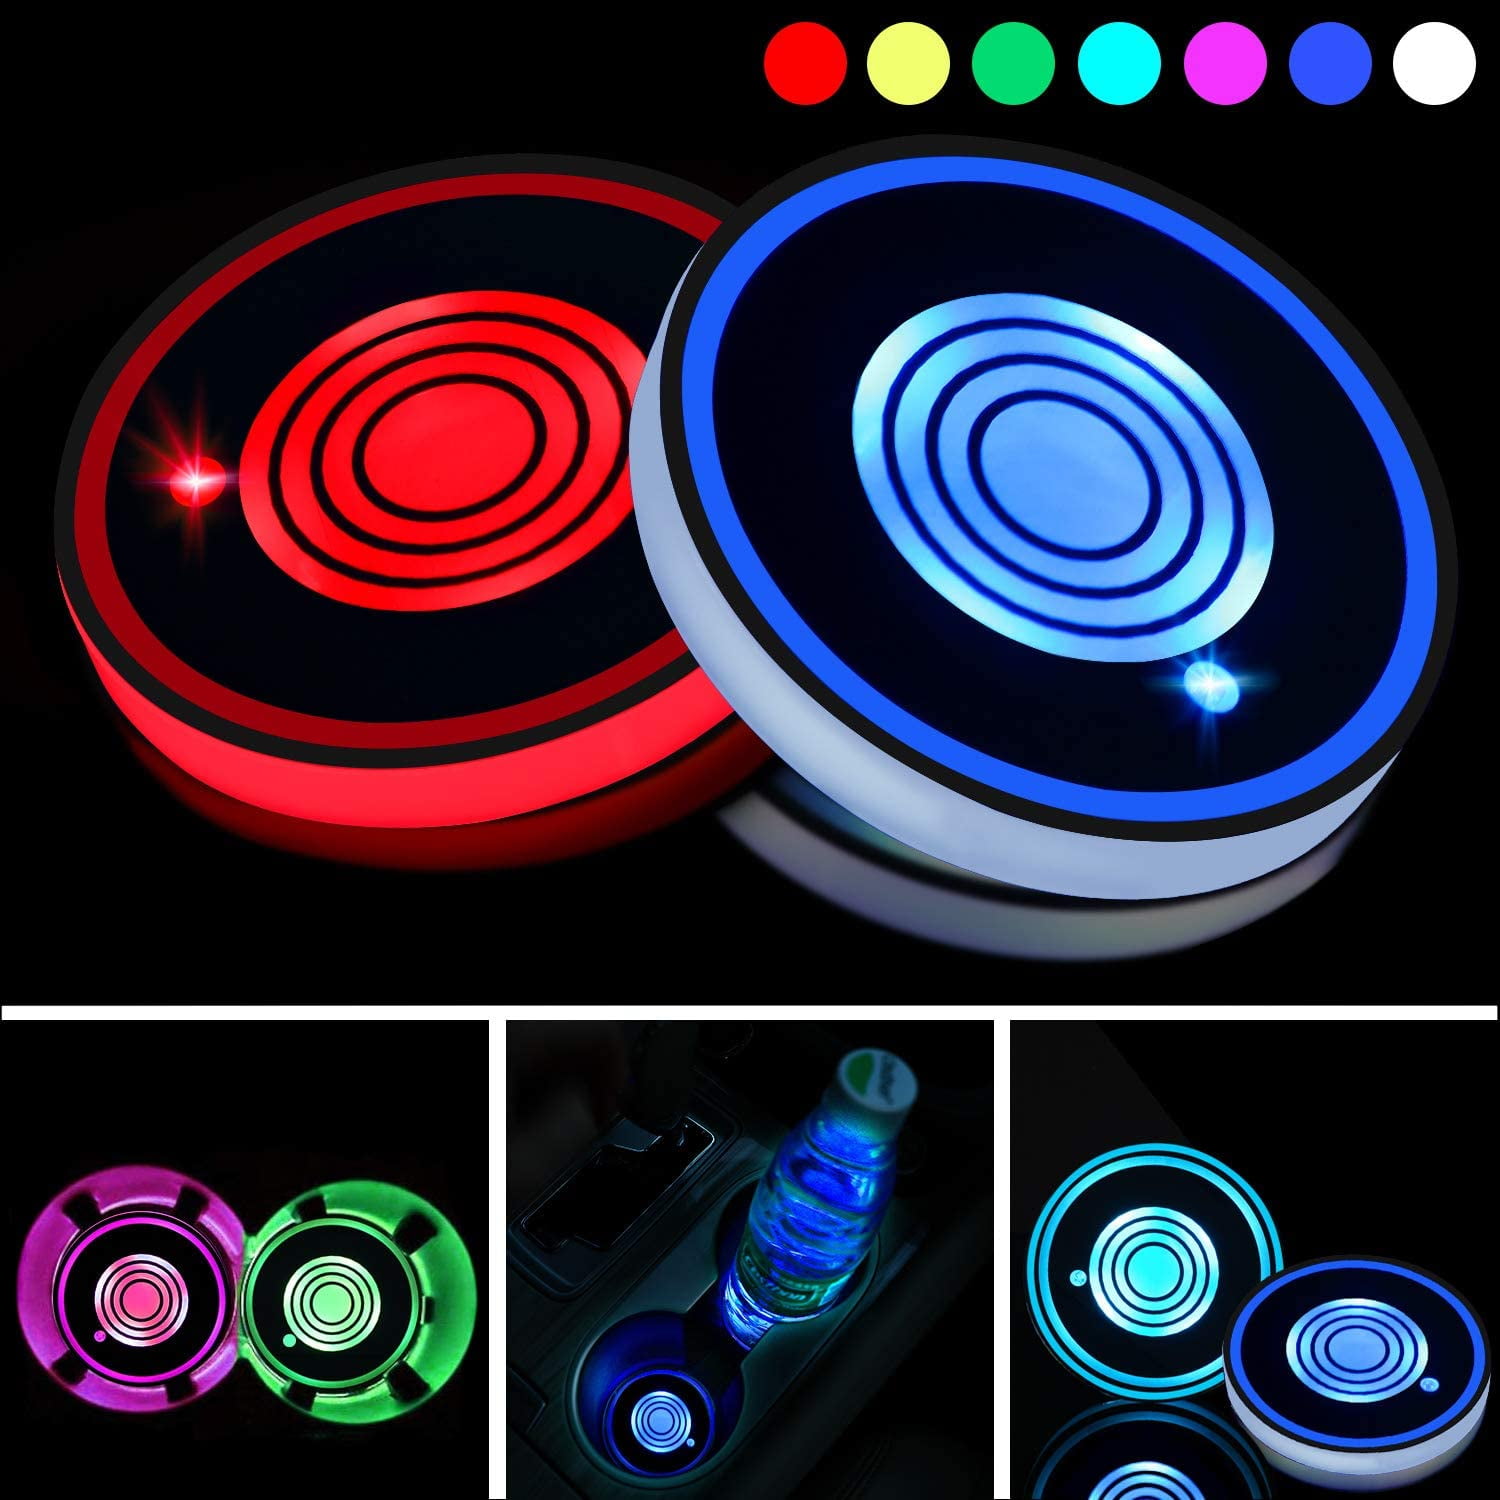 LED Car Cup Holder Lights Type 1 Luminescent Interior Atmosphere Lamp Cool Car Accessories Car Coasters with Remote Control 7 Colors Changing USB Charging Mat 